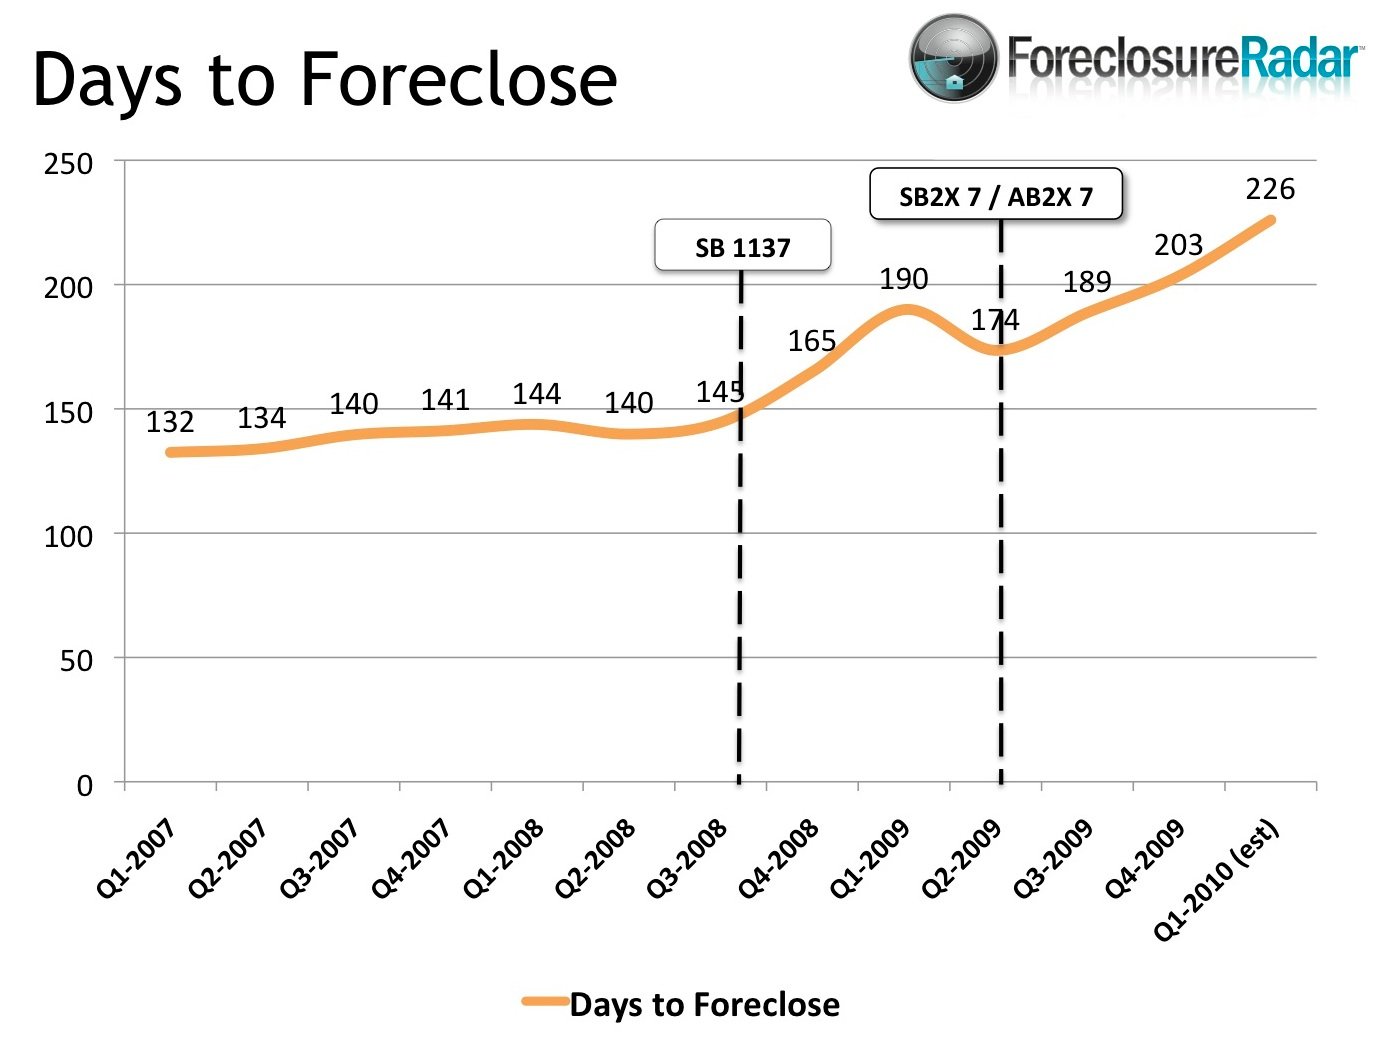 Days to Foreclose